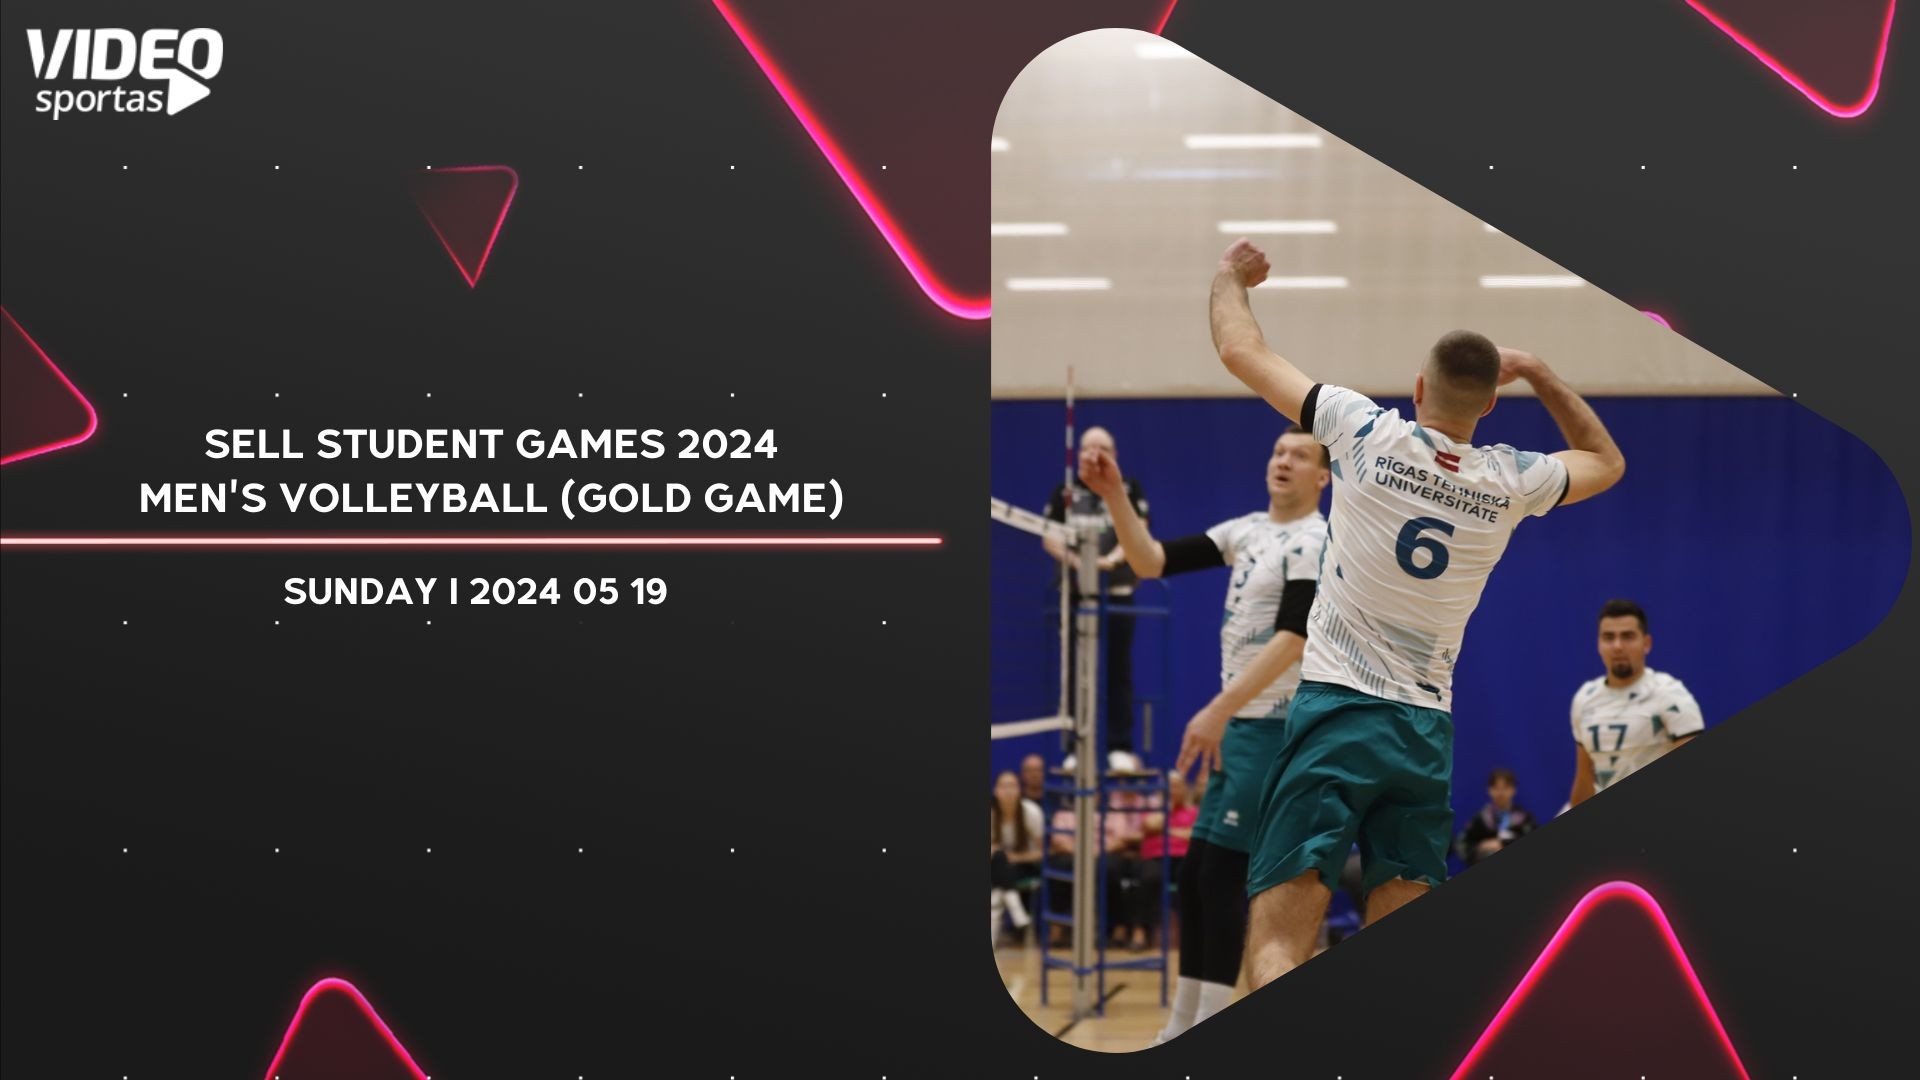 GOLD GAME - SELL STUDENT GAME 2024 (MEN'S VOLLEYBALL)